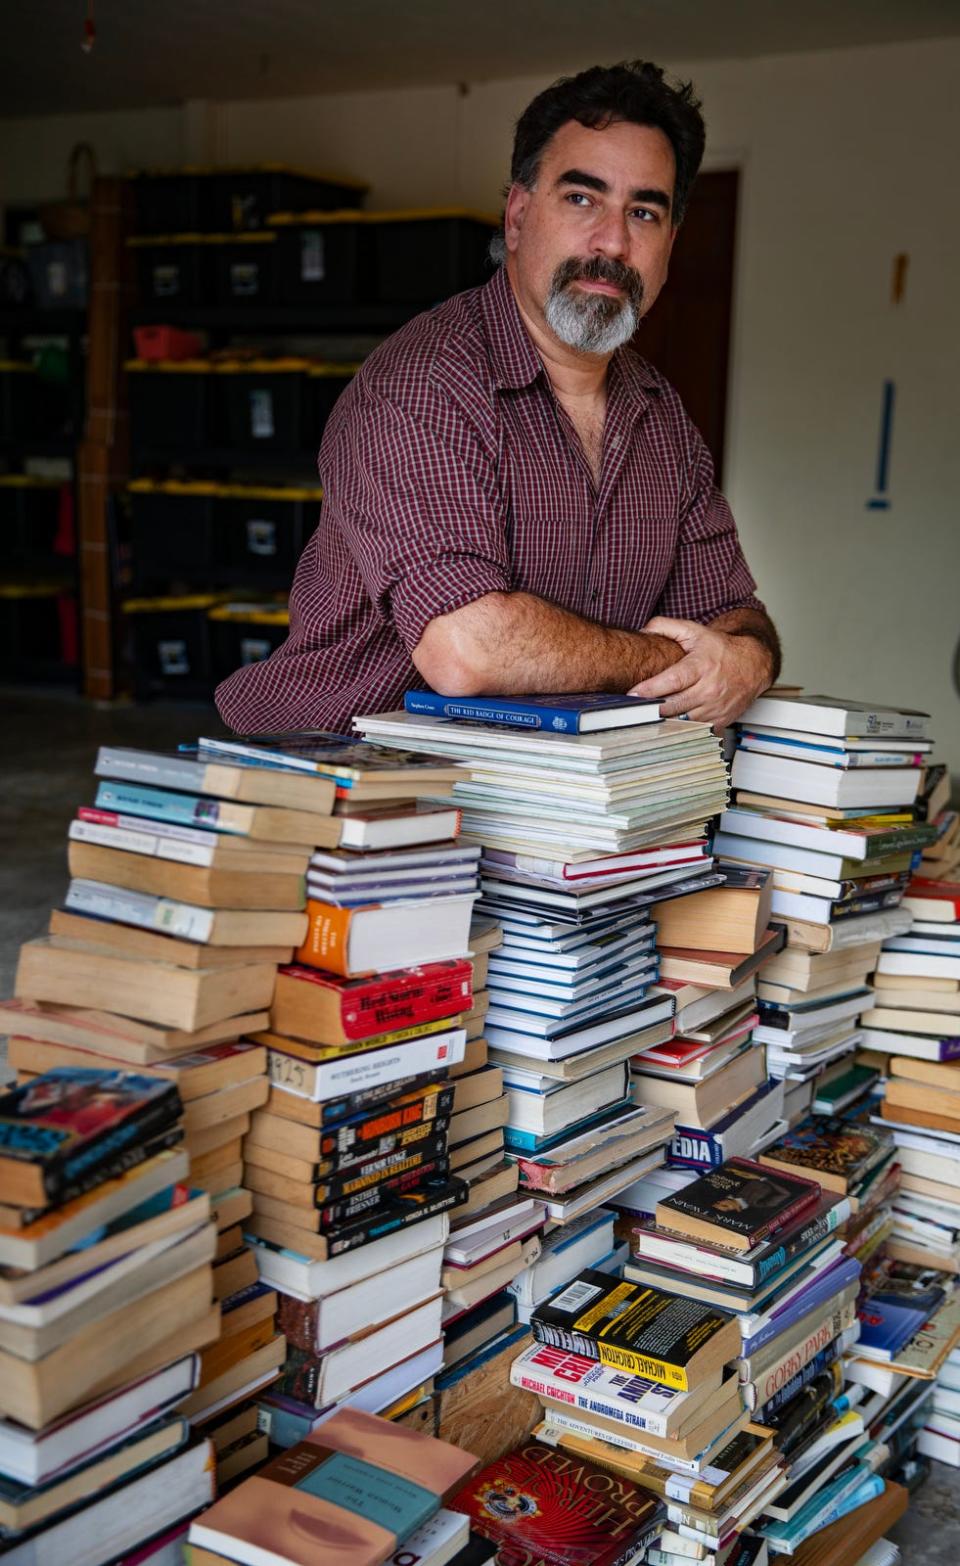 Michael Andoscia, a former teacher at North Fort Myers high school, resigned his position of 8 years after the school removed his in-class library consisting of over 700 books. He has most of the books currently stored in his garage at his Fort Myers home.